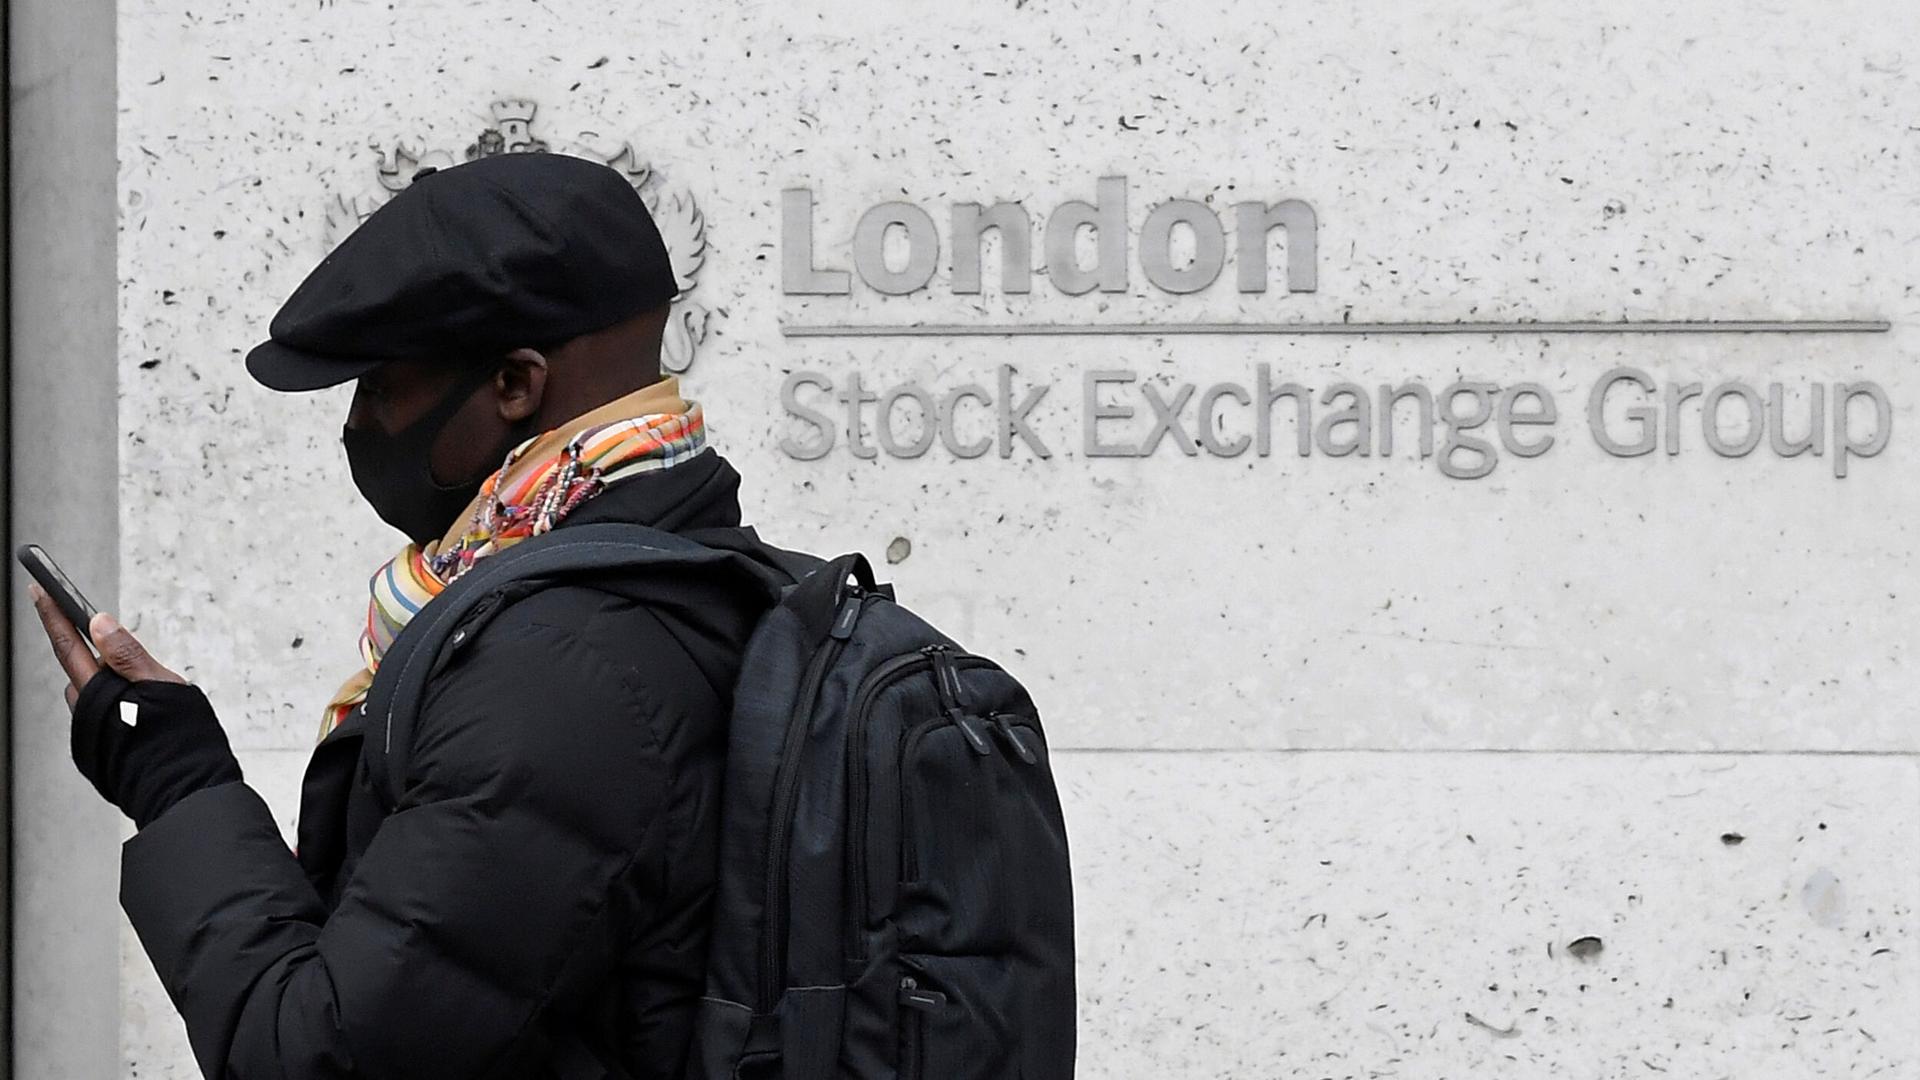 A man wearing a protective face mask and hat walks past the London Stock Exchange Group building